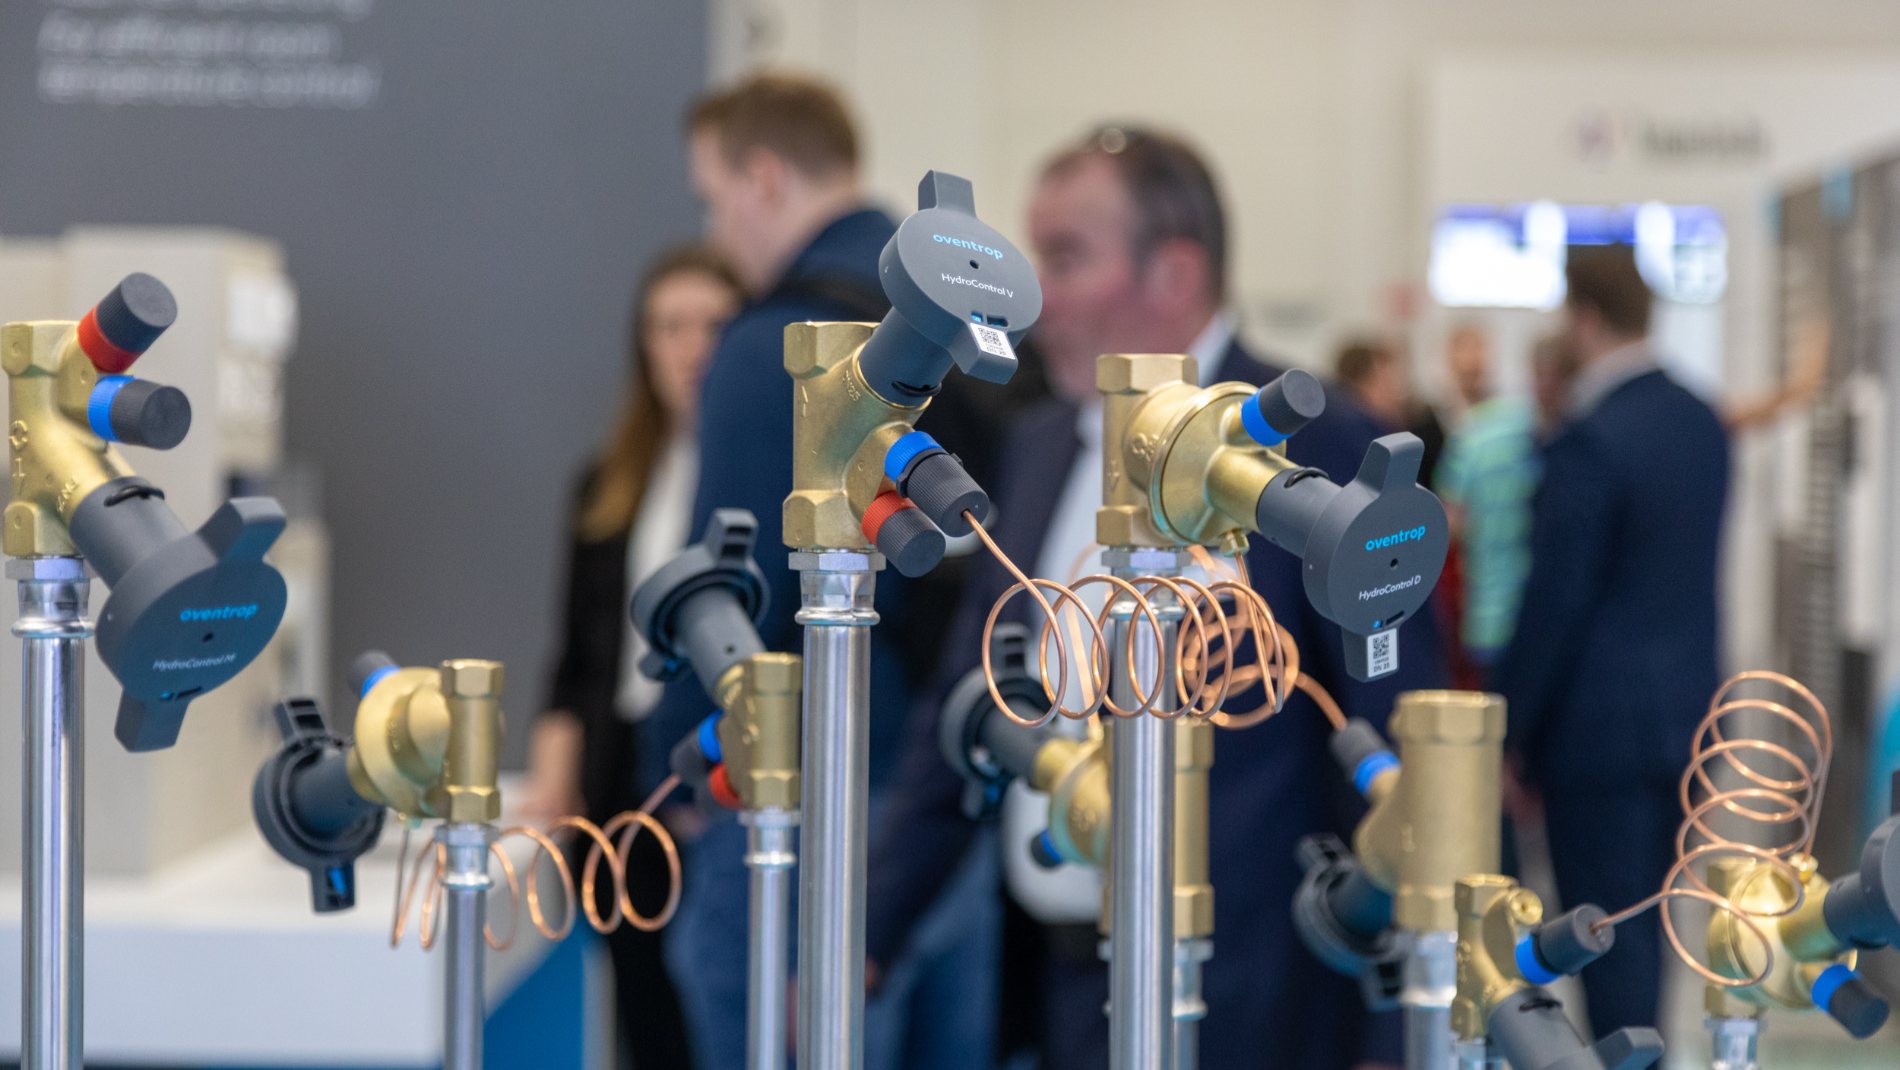 Trade fair visitors stand in front of components for heat generators